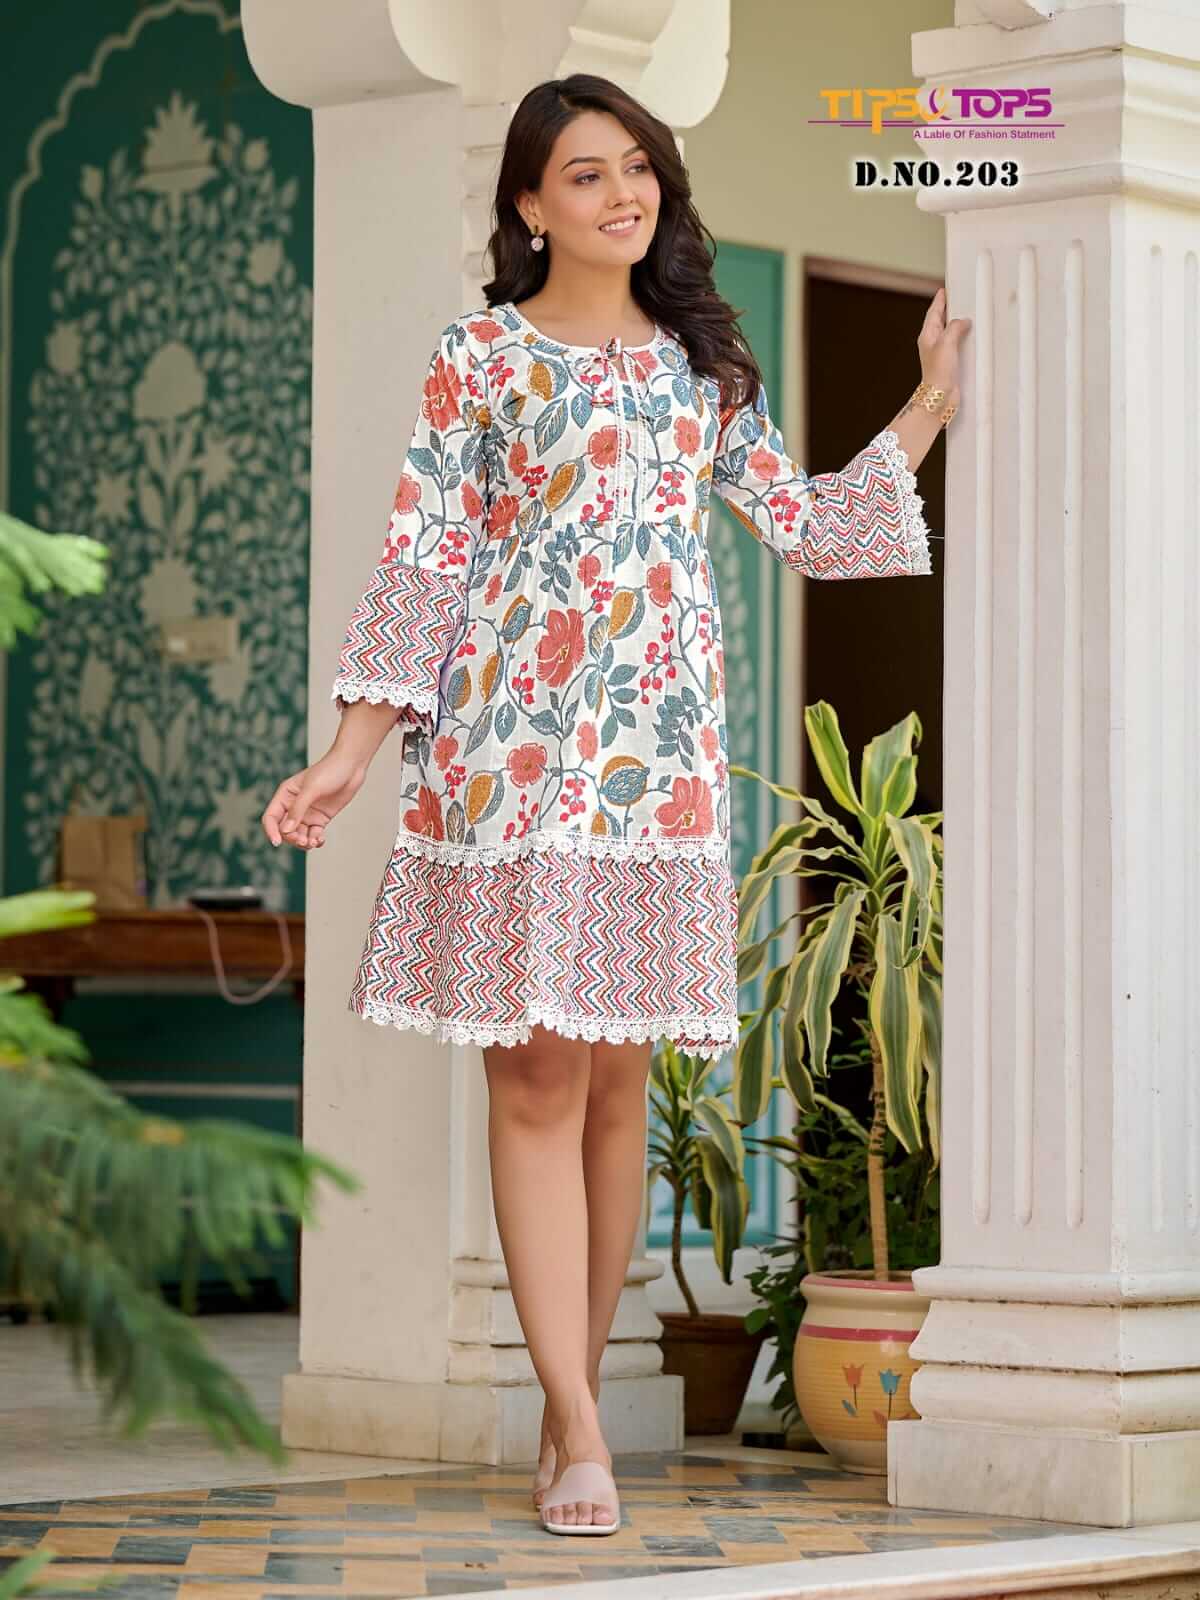 Tips And Tops Fusion Vol 2 One Piece Dress Catalog collection 4